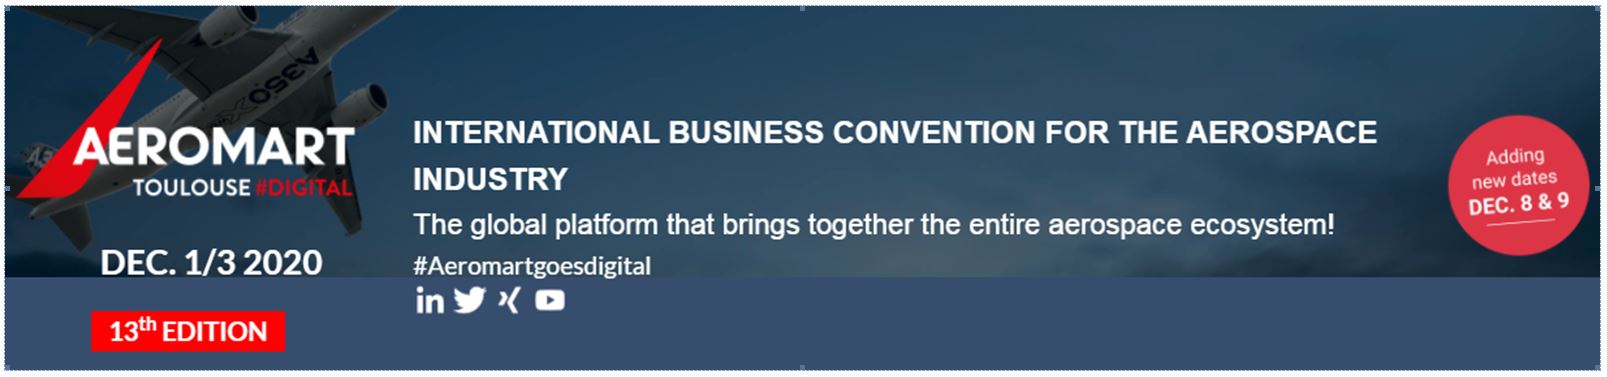 AEROMART TOULOUSE  #100% DIGITAL  International Business Convention for the aerospace industry